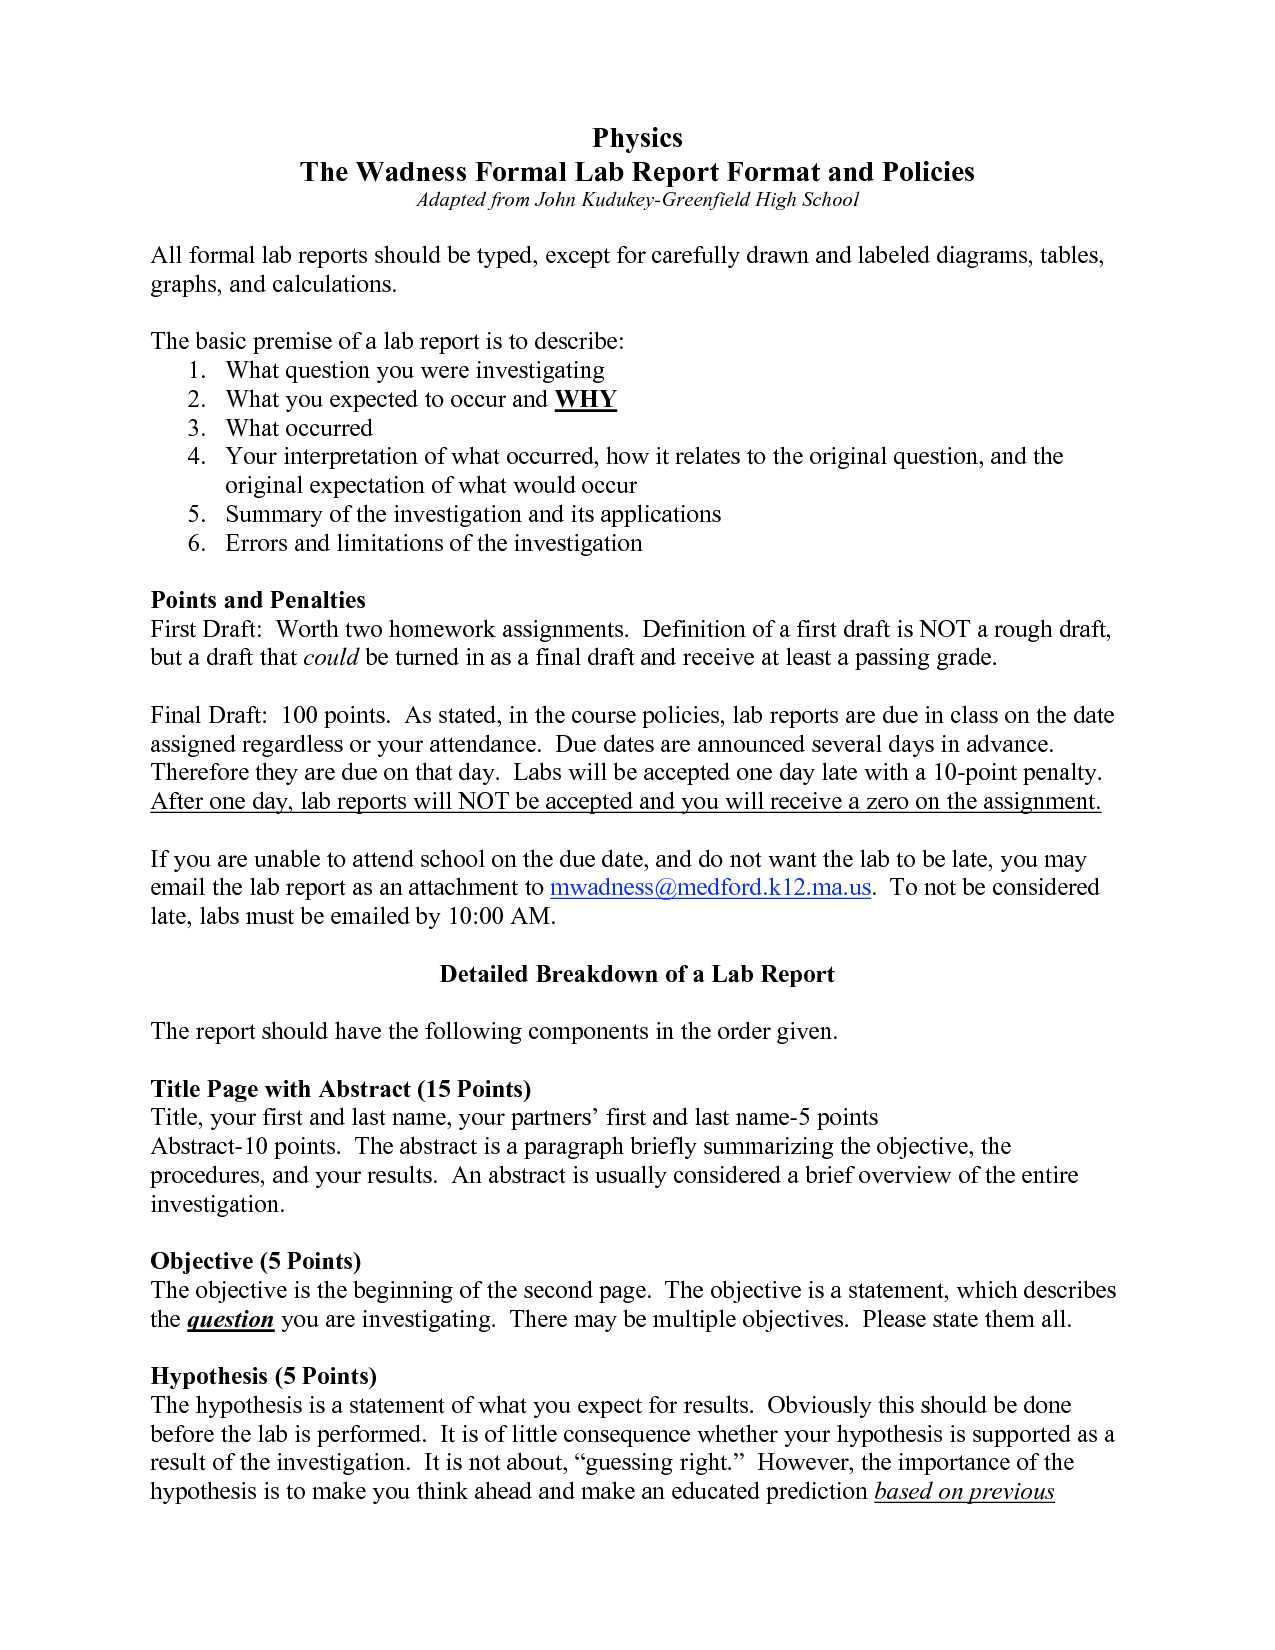 Formal Lab Report Template Physics : Biological Science With Formal Lab Report Template